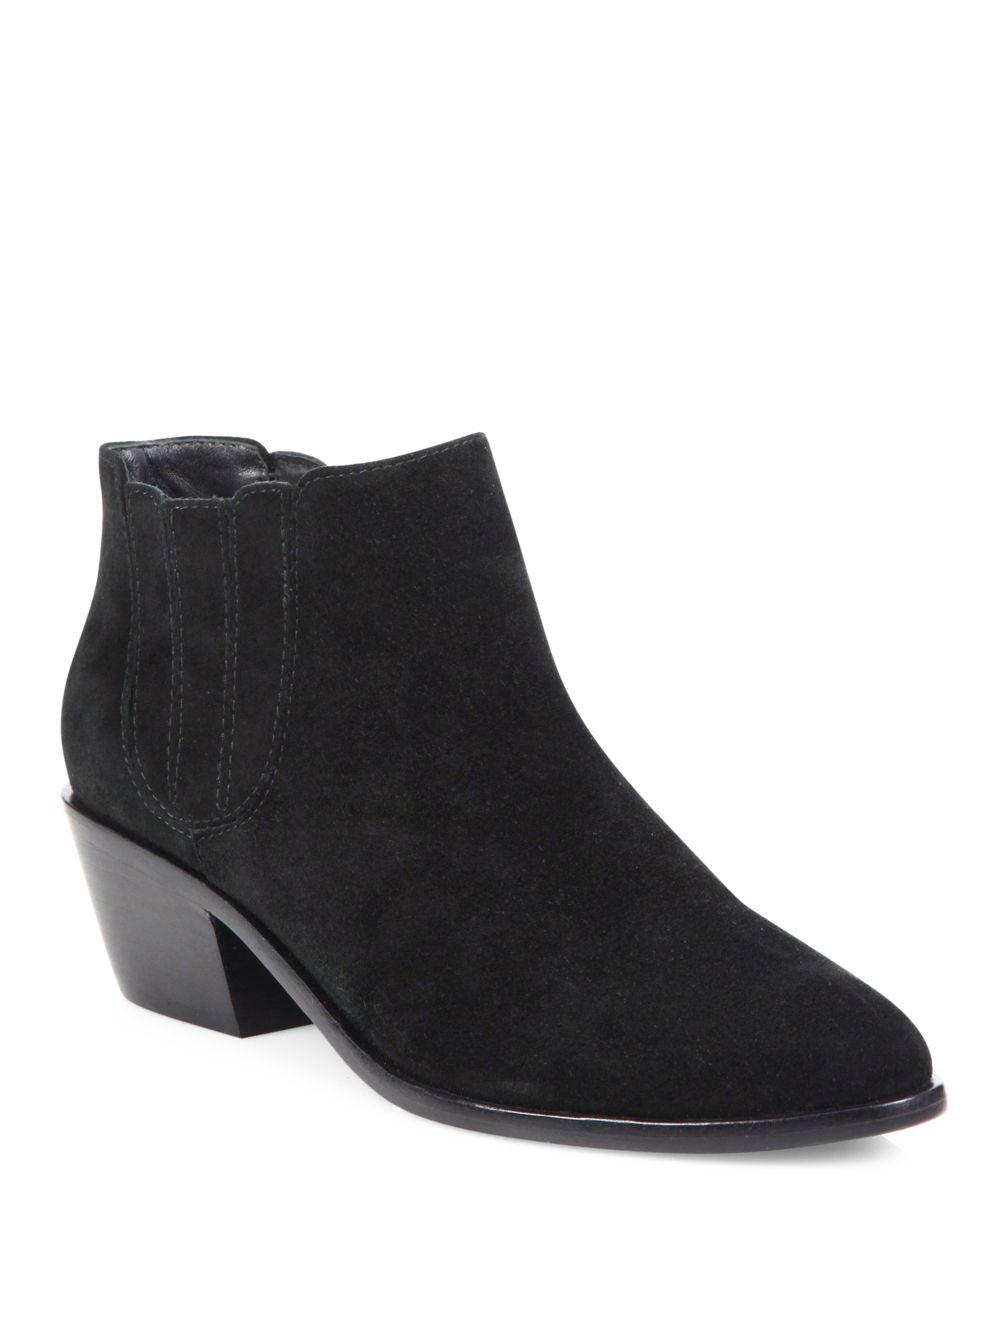 Lyst - Joie Women's Barlow Suede Ankle Boots - Charcoal in Black